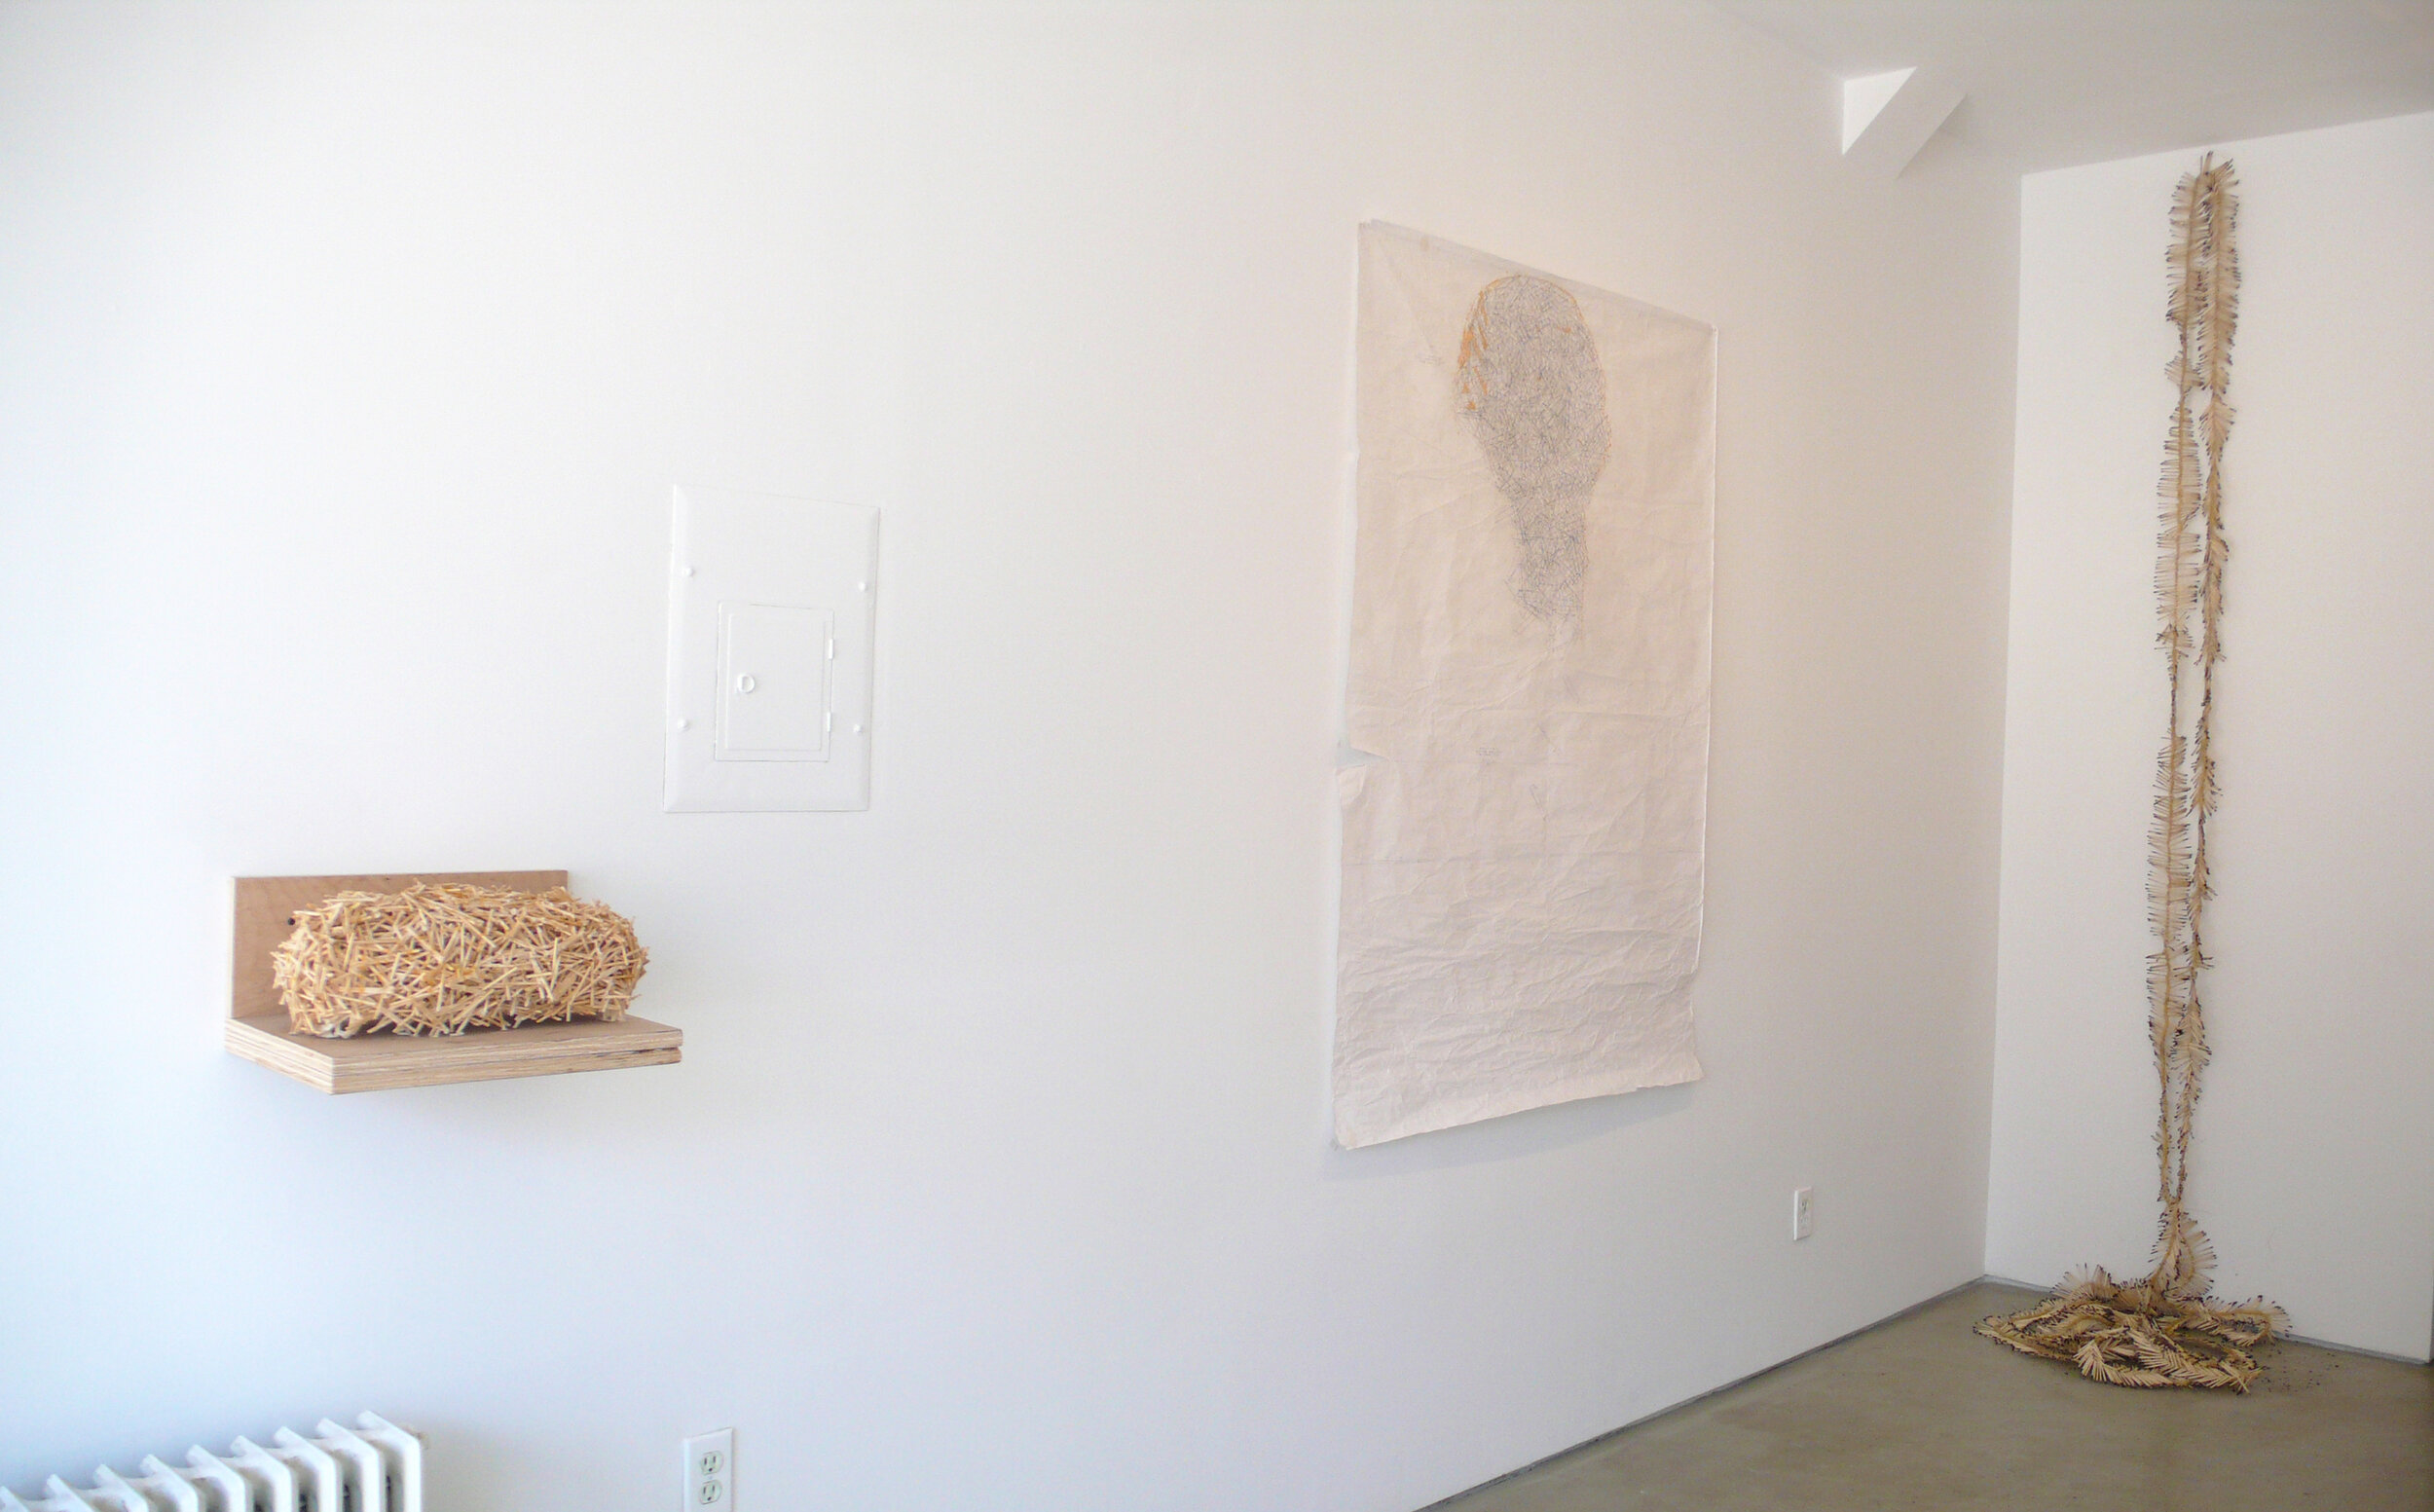 Installation image from the 2010 Keith O. Anderson exhibition, What Becomes of a Broken Heart, at Cindy Rucker Gallery